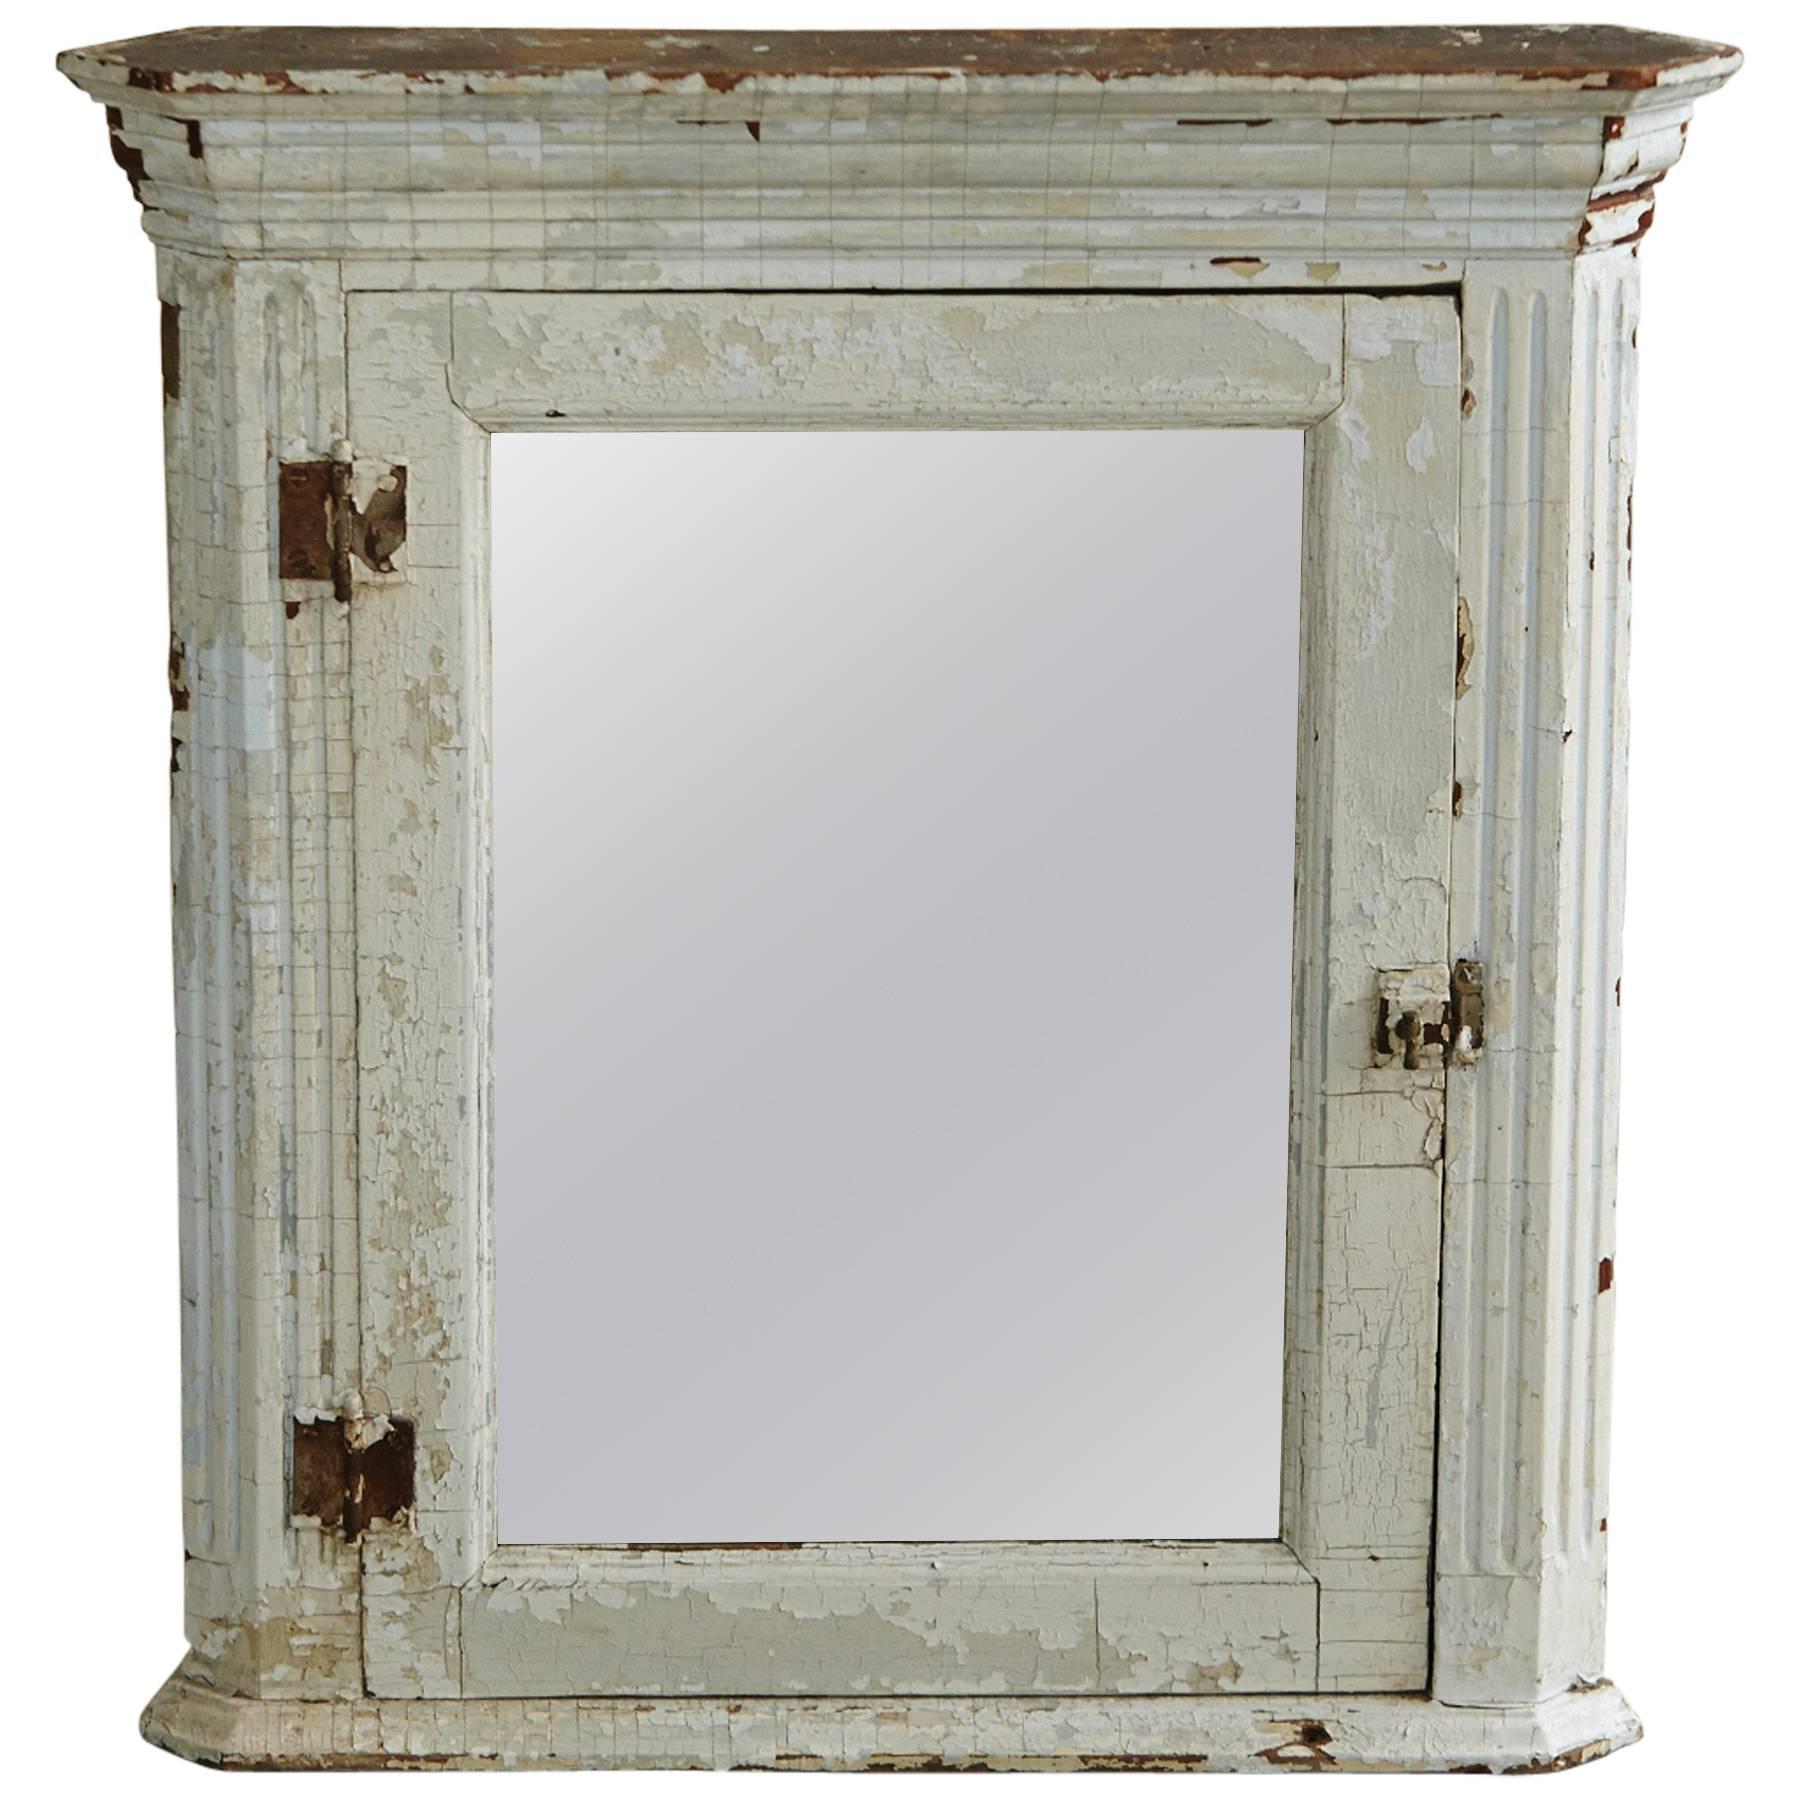 Hanging Corner Cabinet with Mirror and Weathered Patina